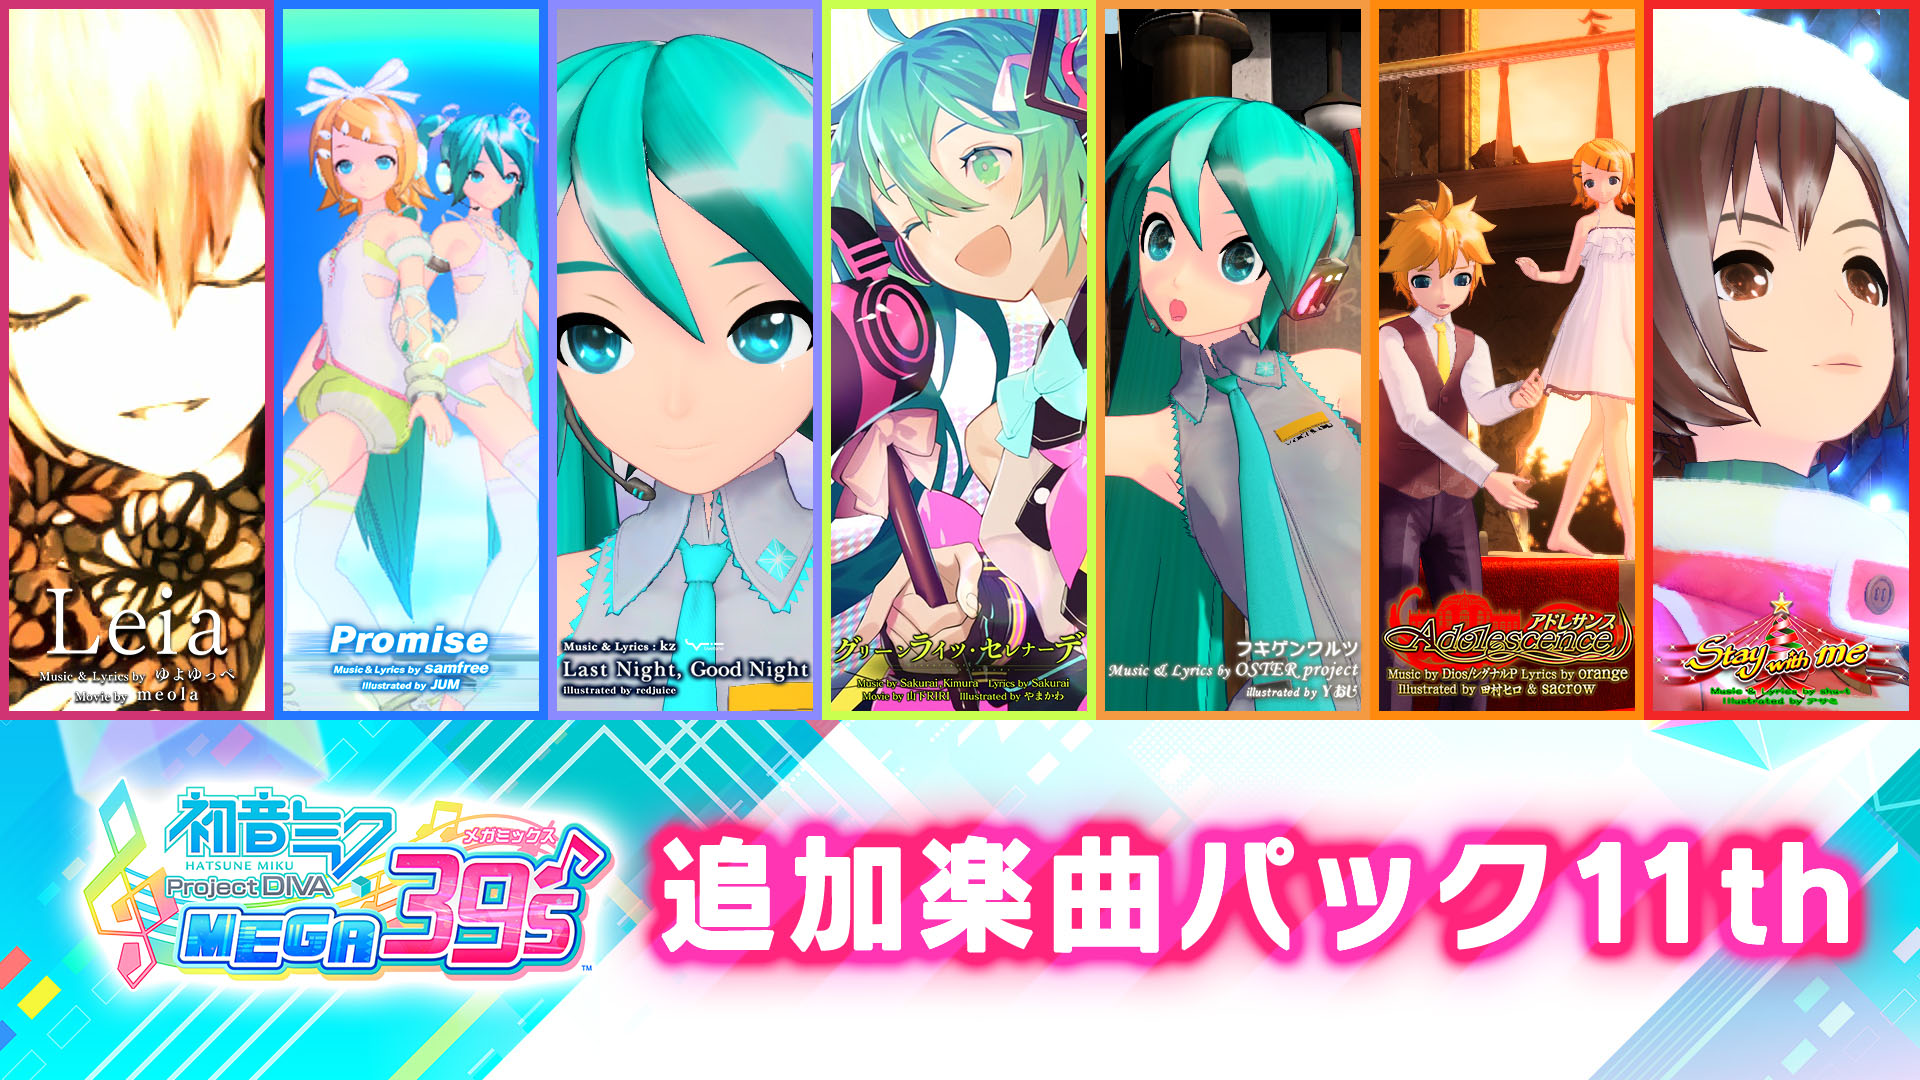 Hatsune Miku Project Diva Mega Mix Dlc Additional Music Pack 10th And 11th Launch September 17 In Japan Gematsu